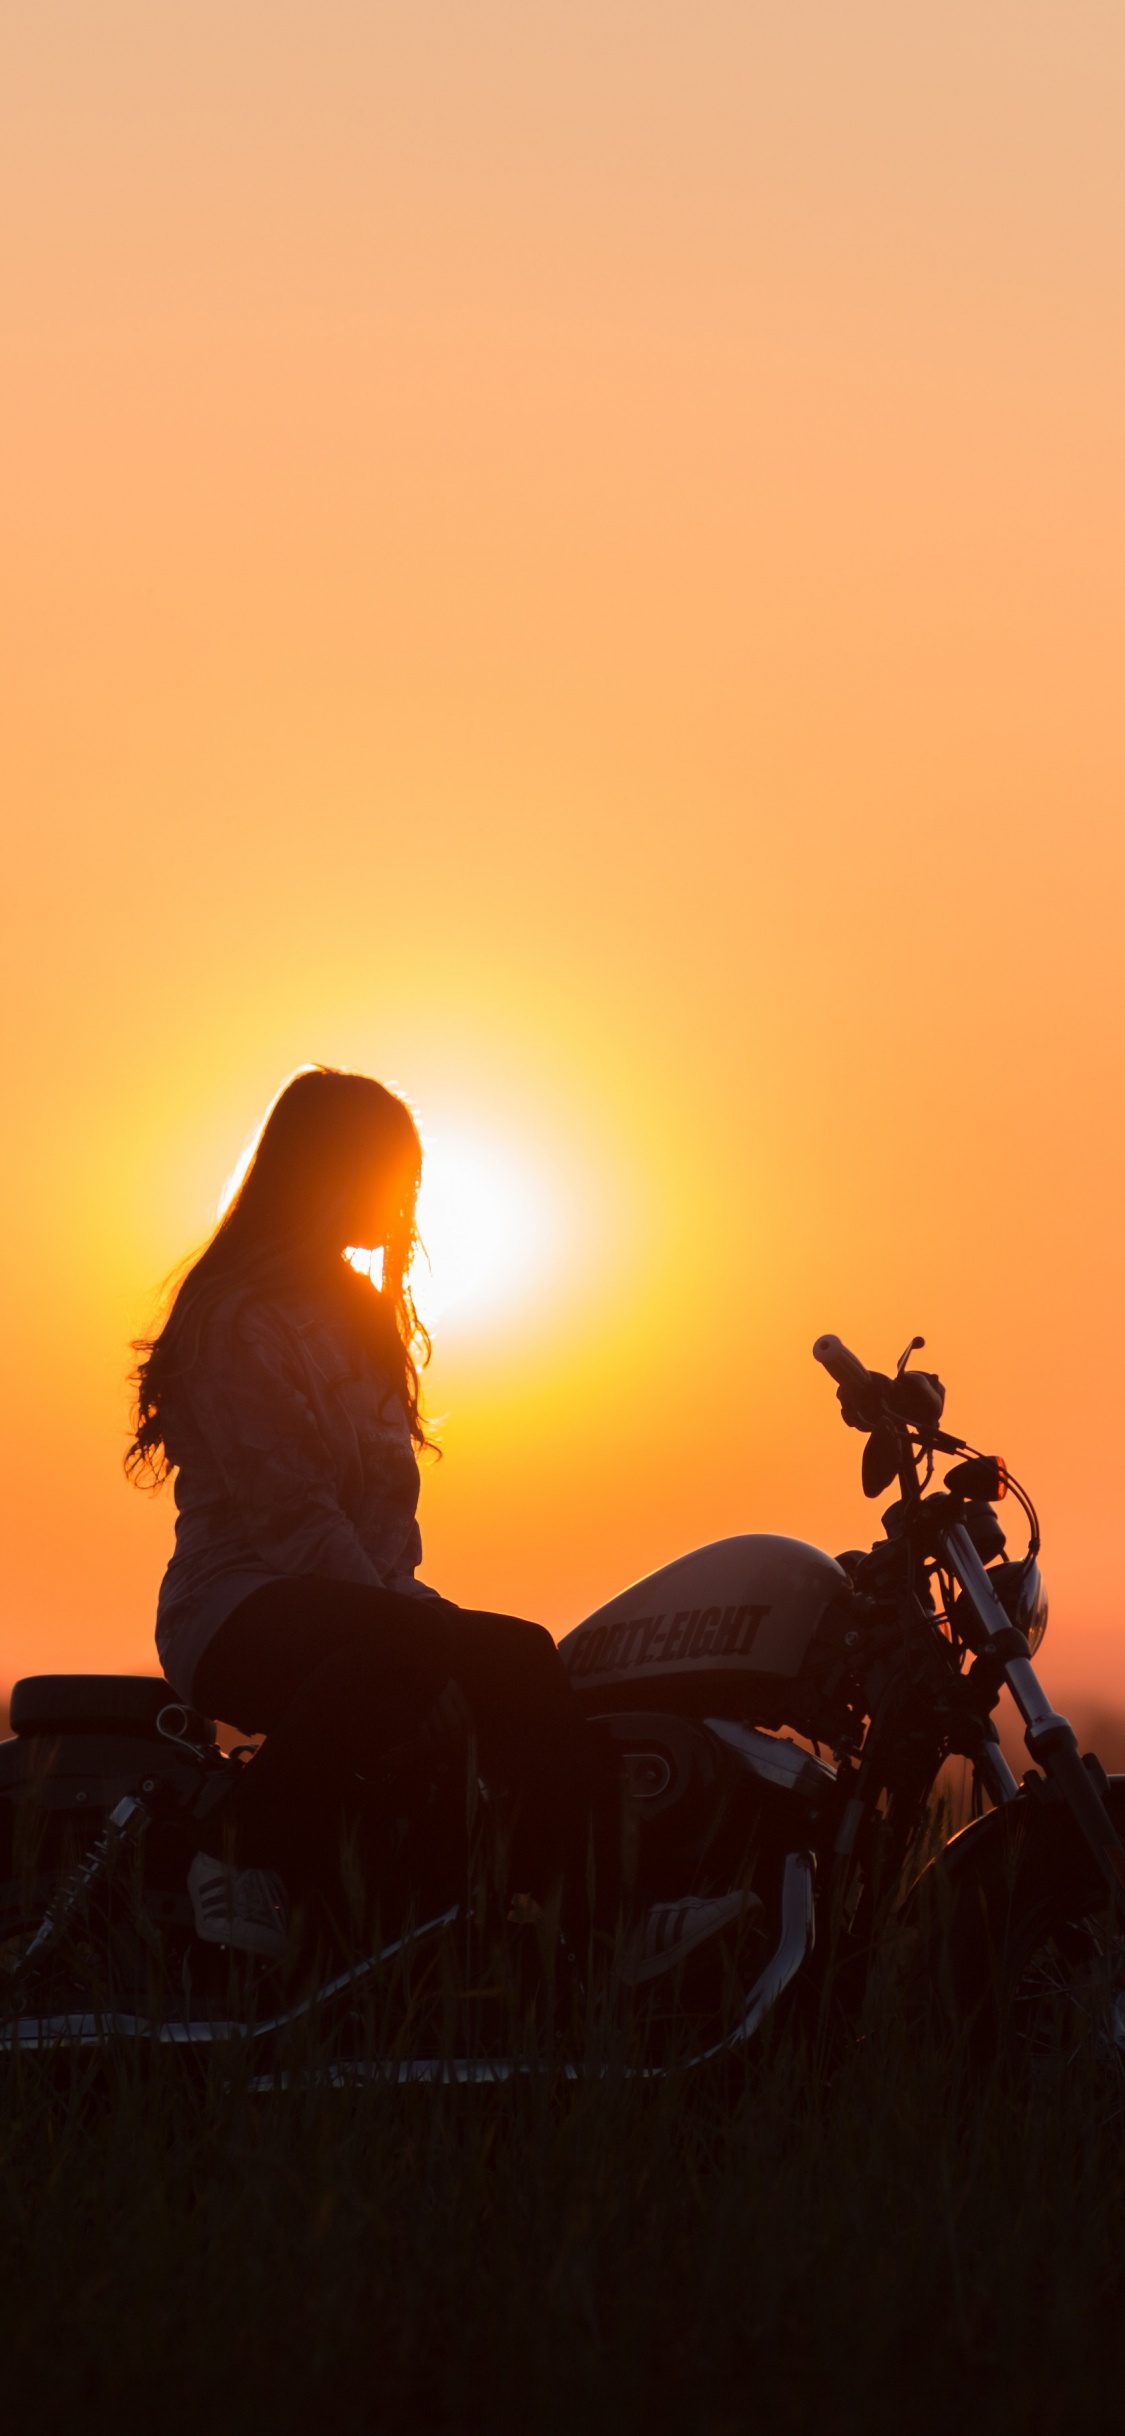 Silhouette of Man Riding Motorcycle During Sunset. Wallpaper in 1125x2436 Resolution